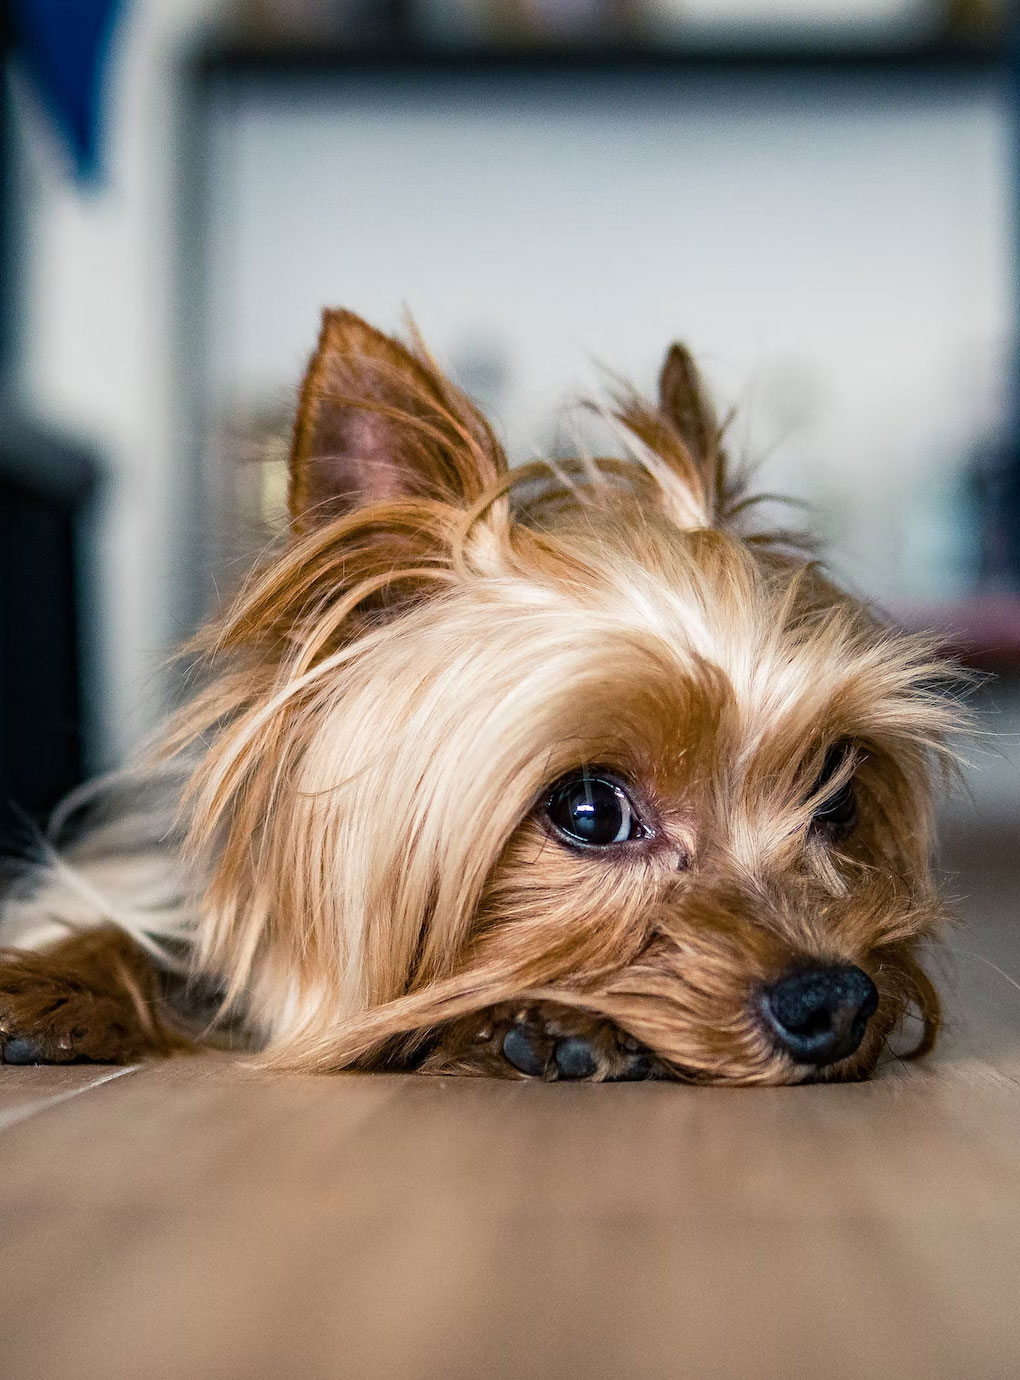 When can I start training my Yorkie? Read more to find out when and how to start training your Yorkie.